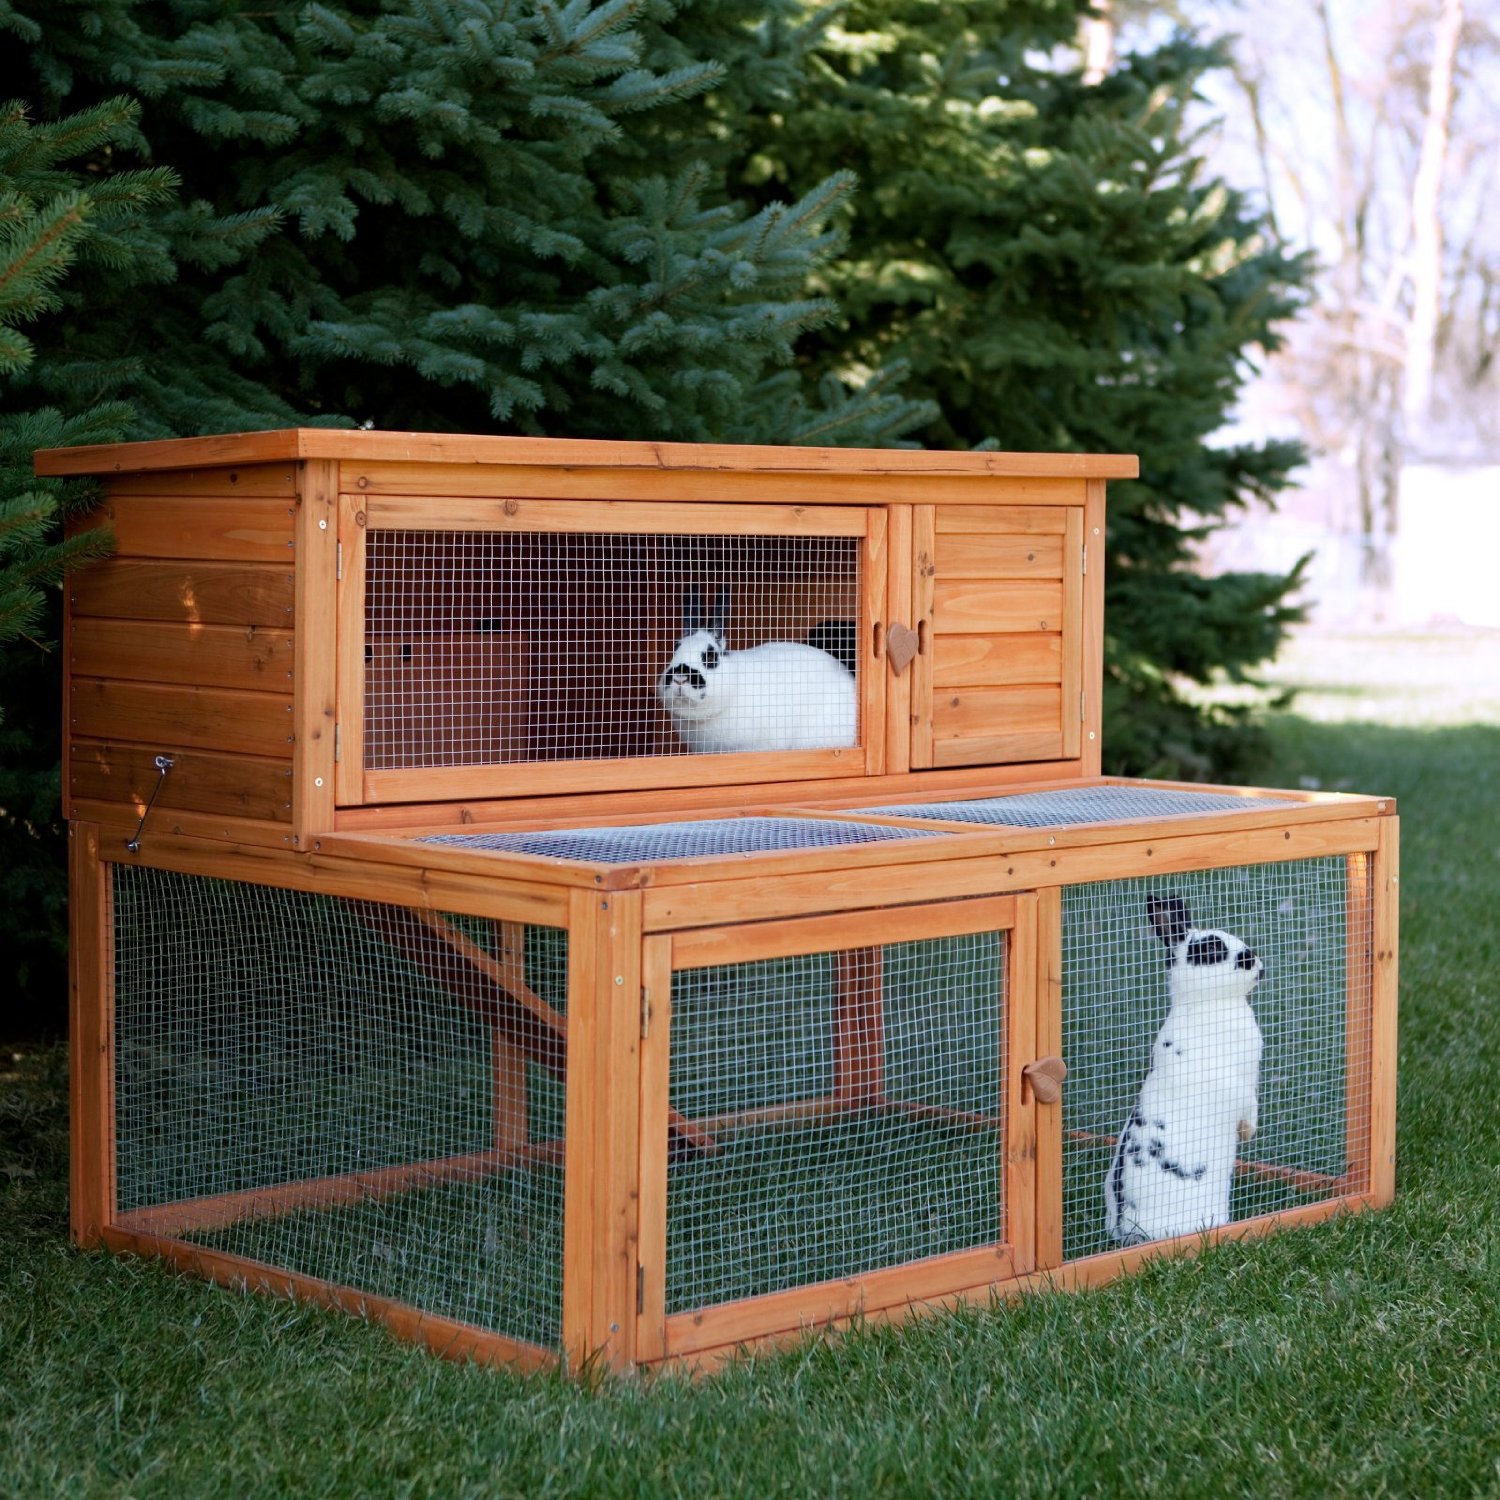  in the household and with the bunny comes the need for a rabbit hutch